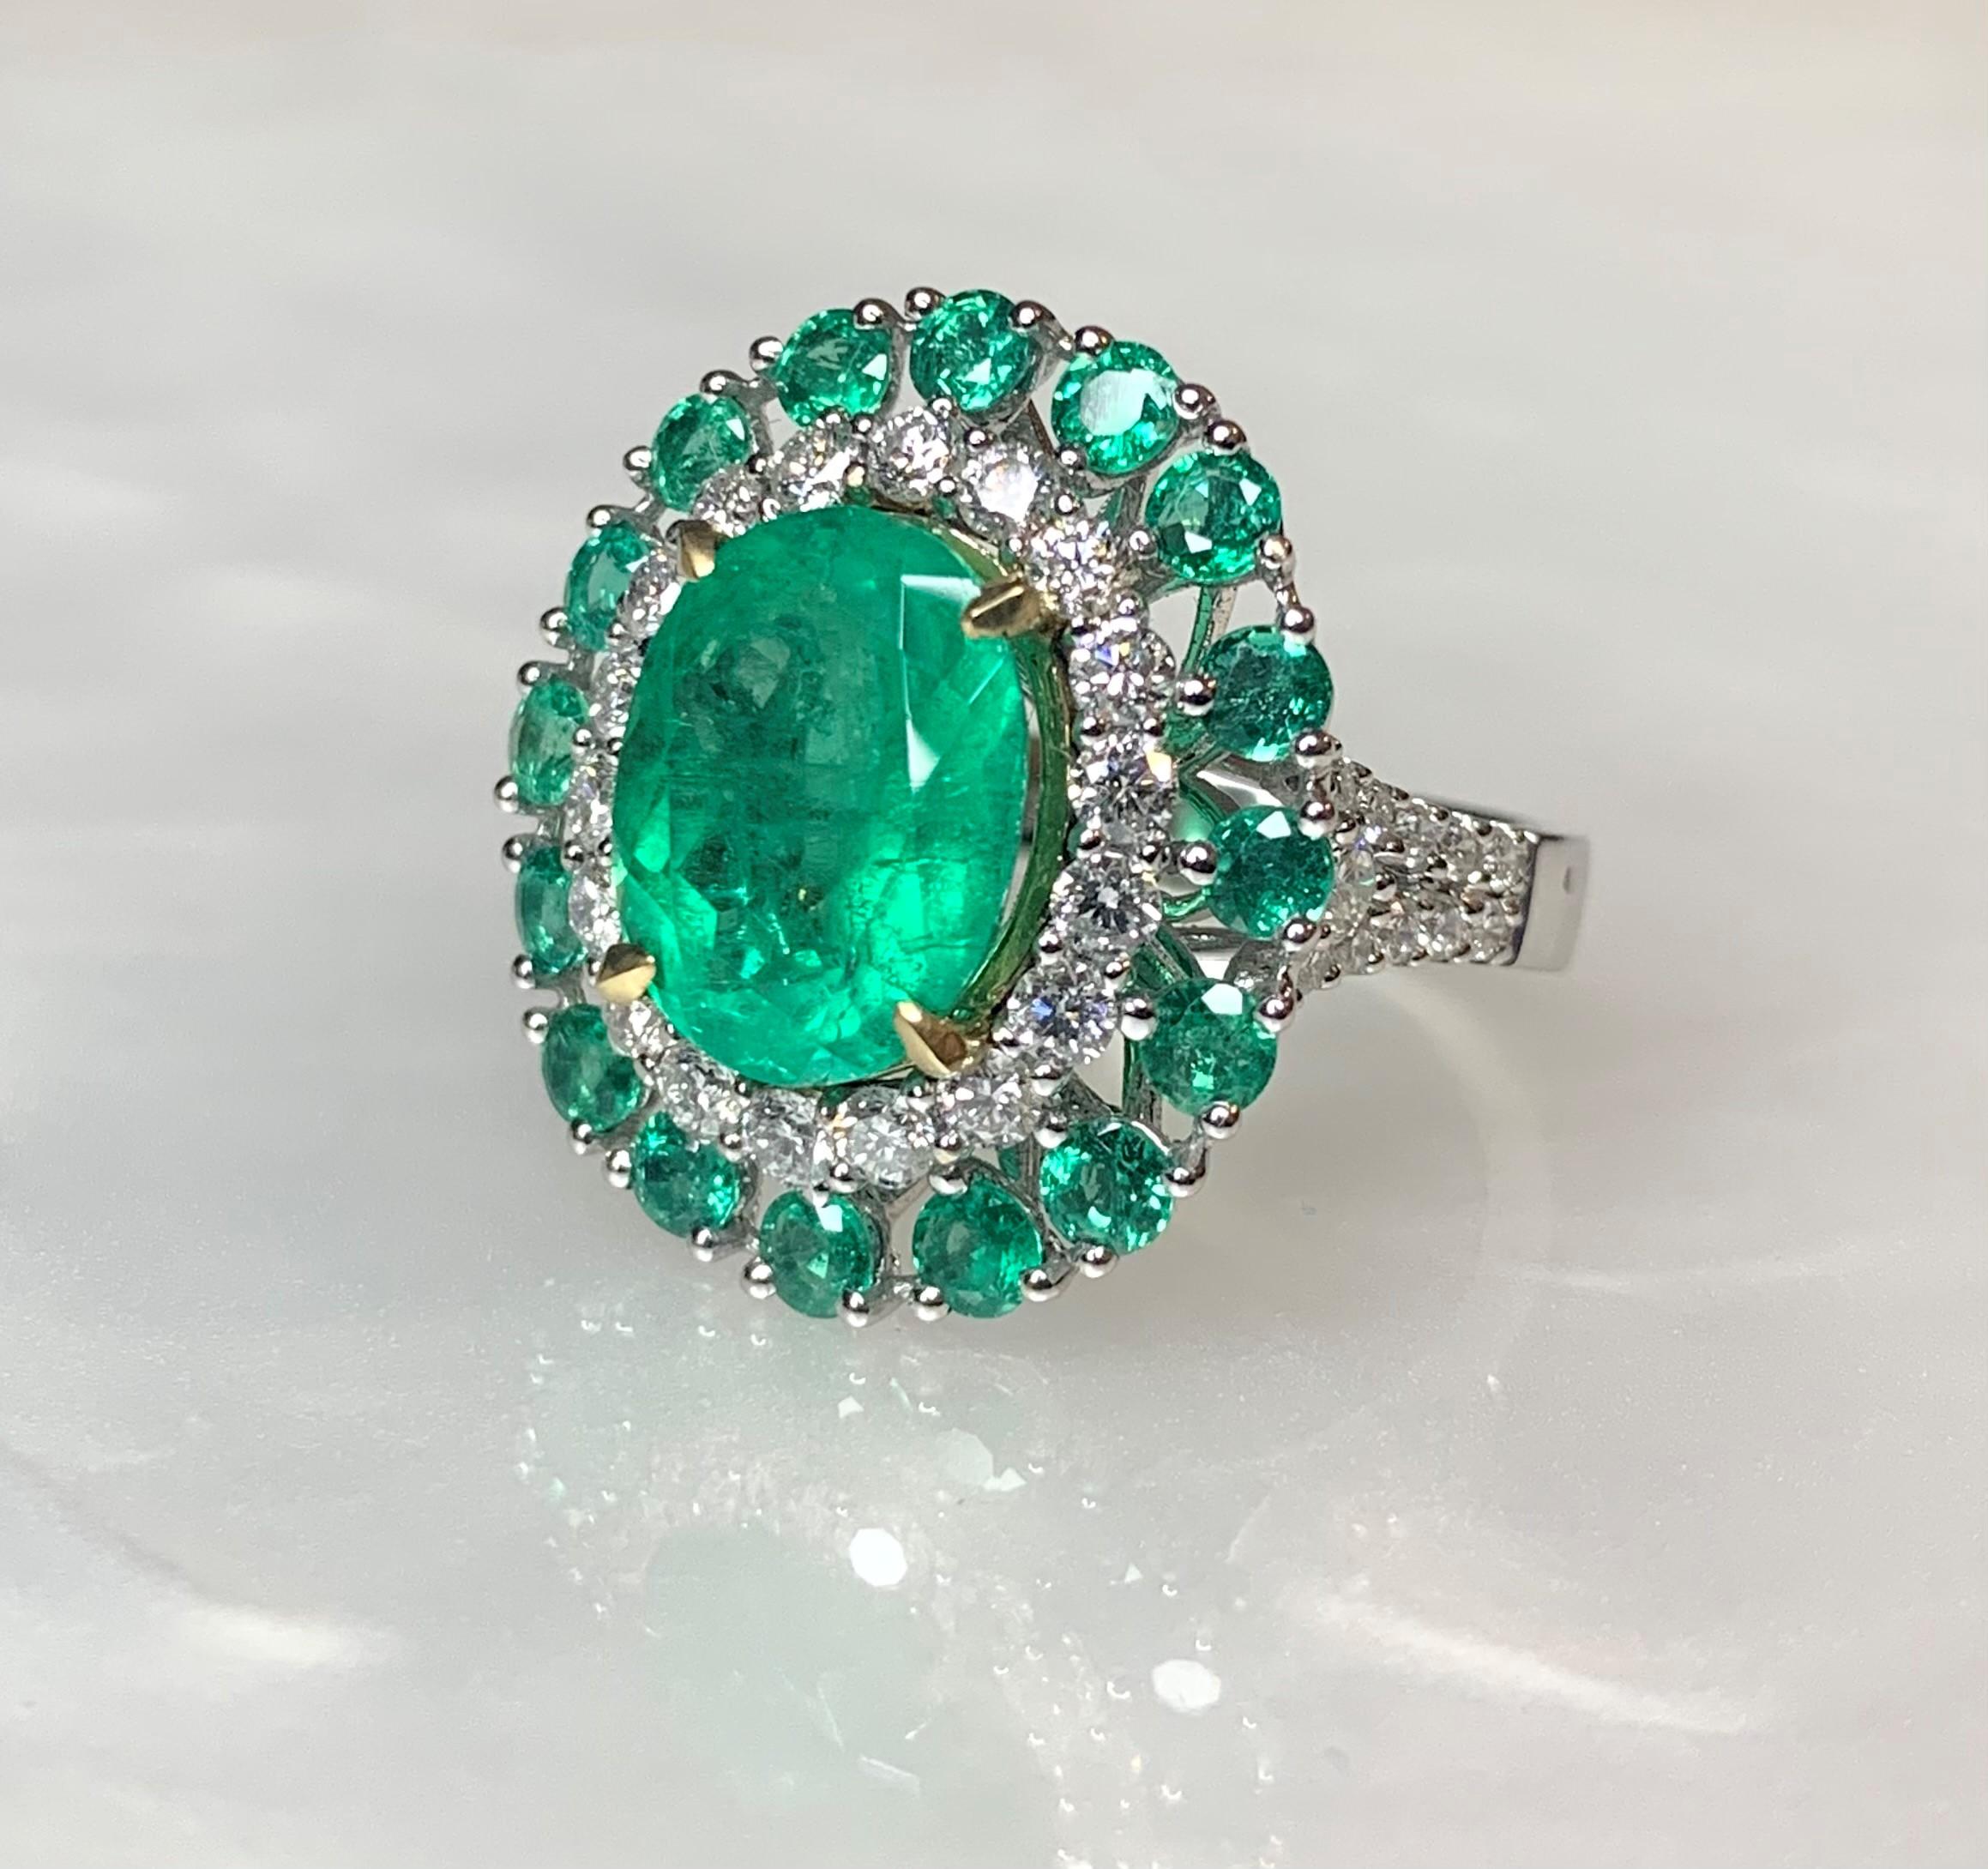 An enchanting candy colored Colombian emerald ring featuring a unique oval center stone weighing 4.44 carats surrounded by 16 emeralds weighing 1.32 carats and a halo of diamonds with a total weight of 1.27 carats.

*Approximate stone